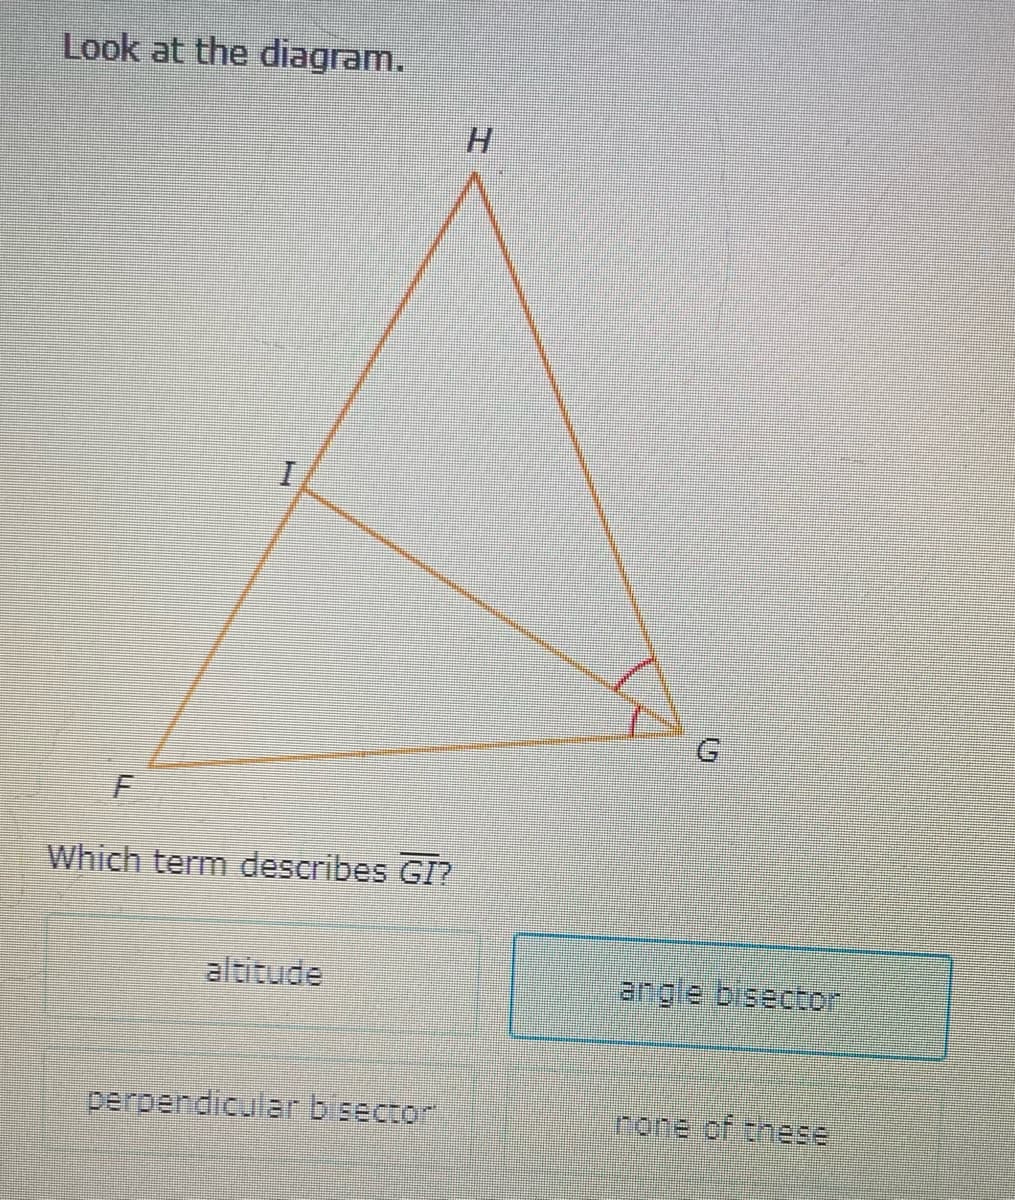 Look at the diagram.
H.
Which term describes GI?
altitude
angle bisector
perpendicular bisector
rone of these
